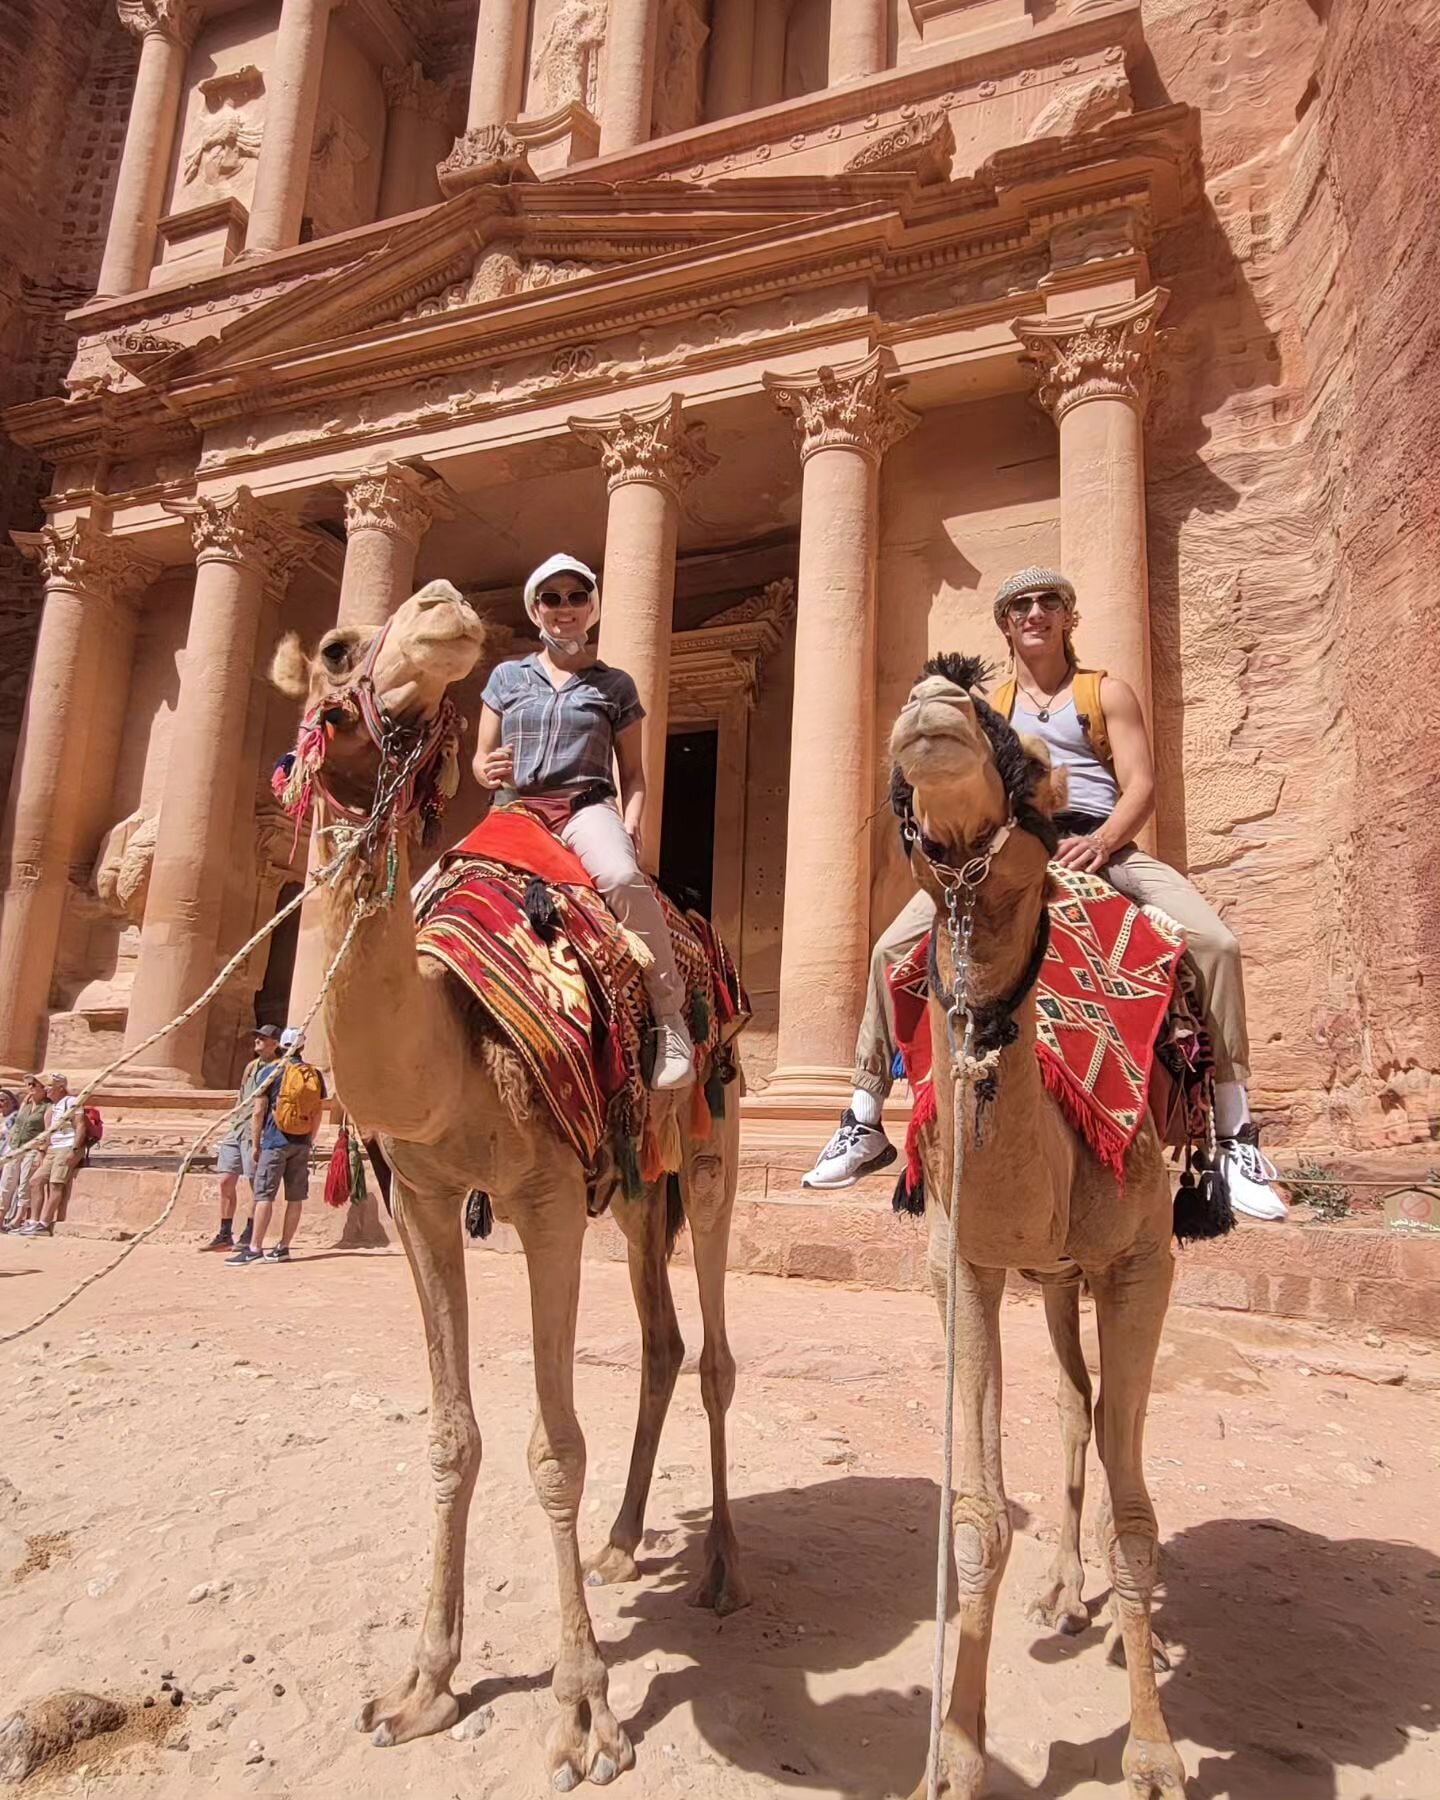 Petra 

One of the 7 wonders of the world and absolutely awe struck of the landscape caves and colors!

Caves, tombs, the treasury, all carved without equipment!

 The lost city 
Only 25% of this city has been excavated.

 The people engineered a way